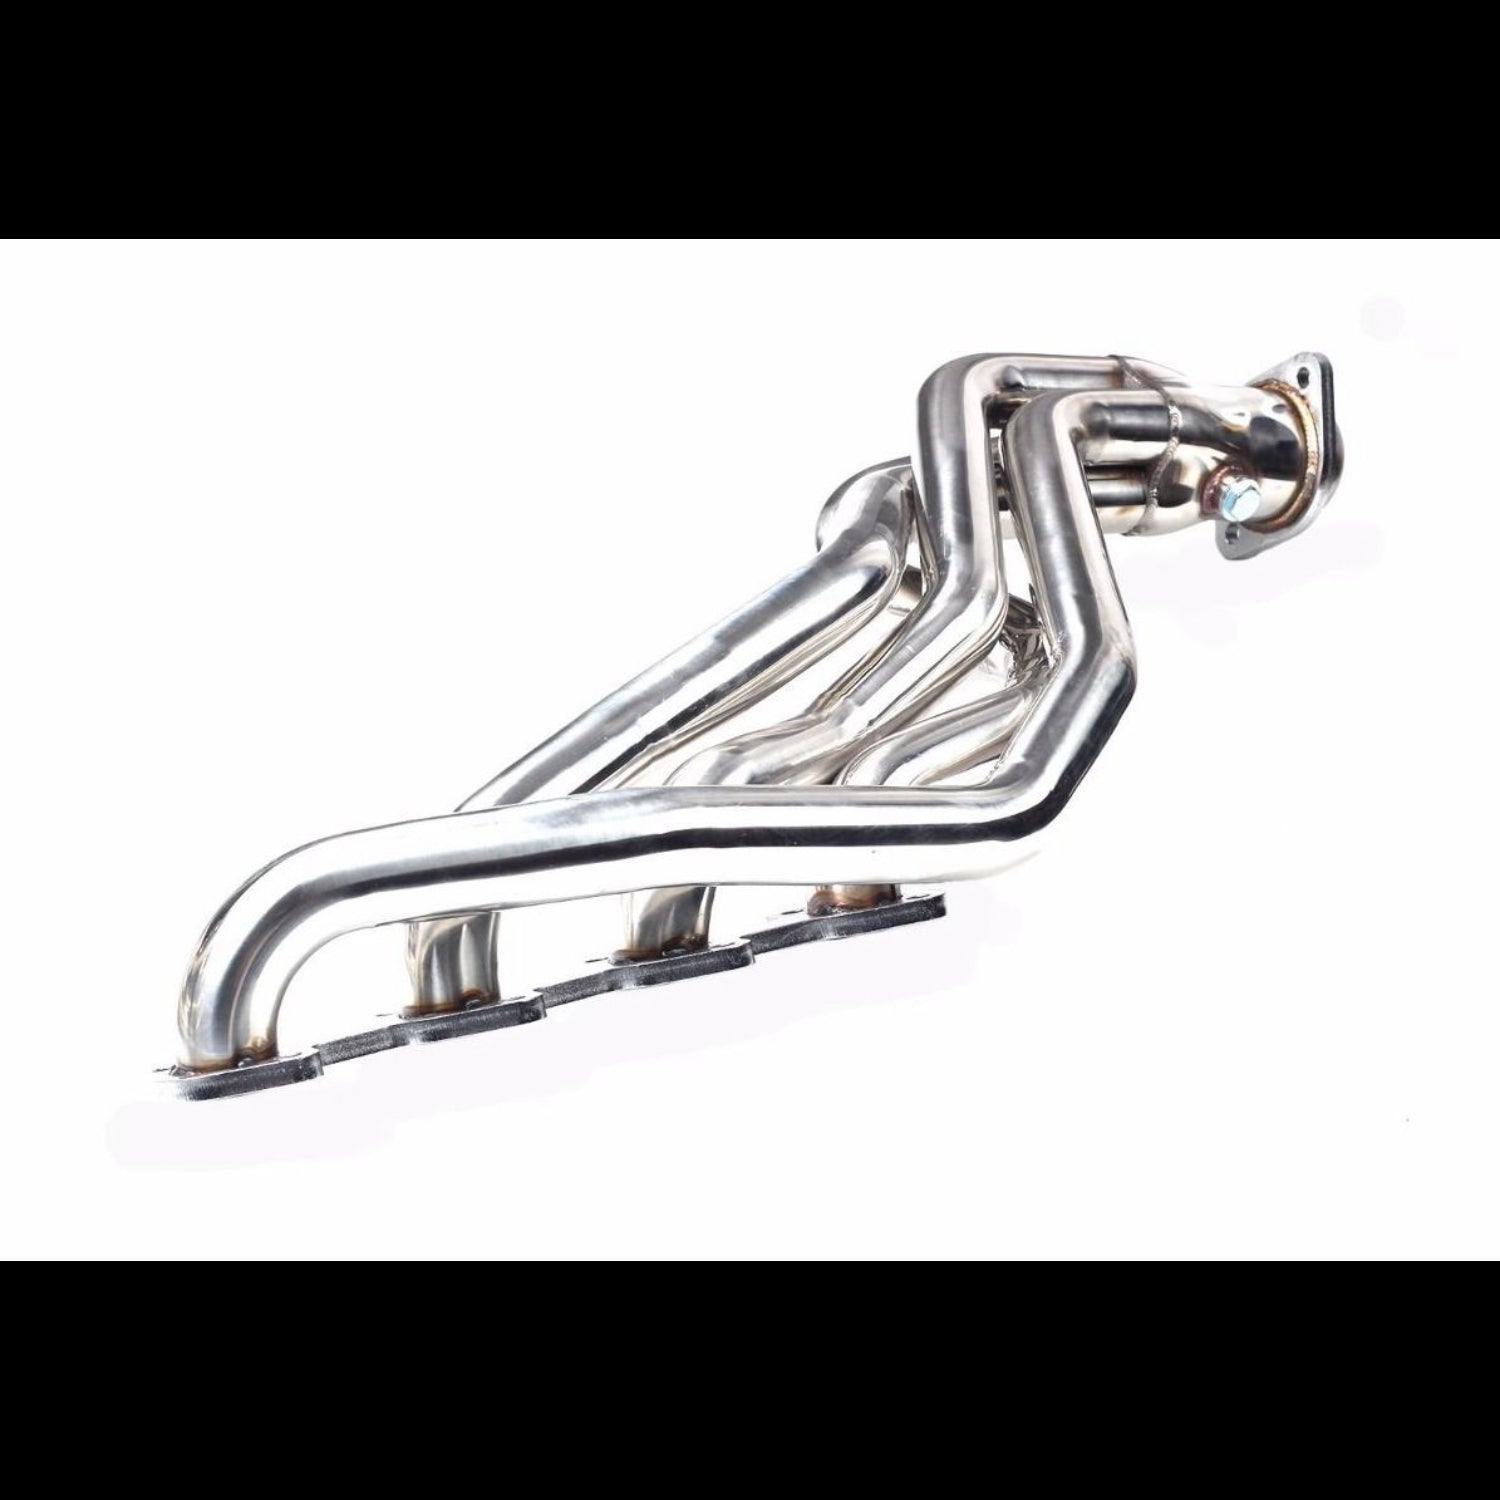 Exhaust Manifold Headers for 1996-2004 Ford Mustang GT V8 4.6